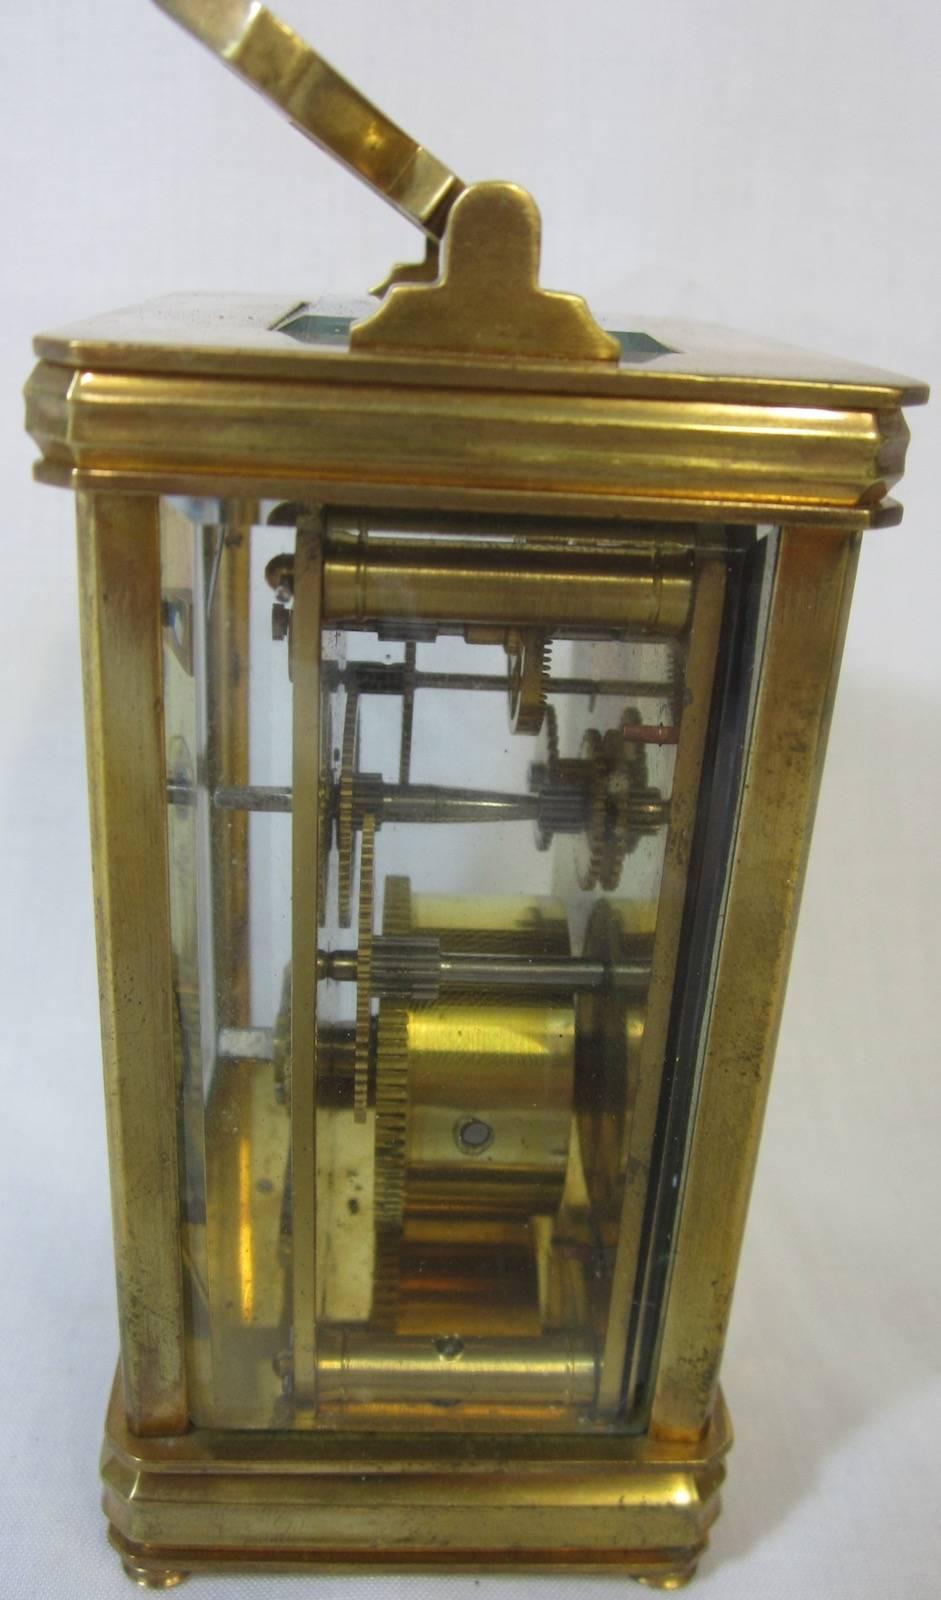 Hand-Crafted French Carriage Clock with New Zealand Retailer